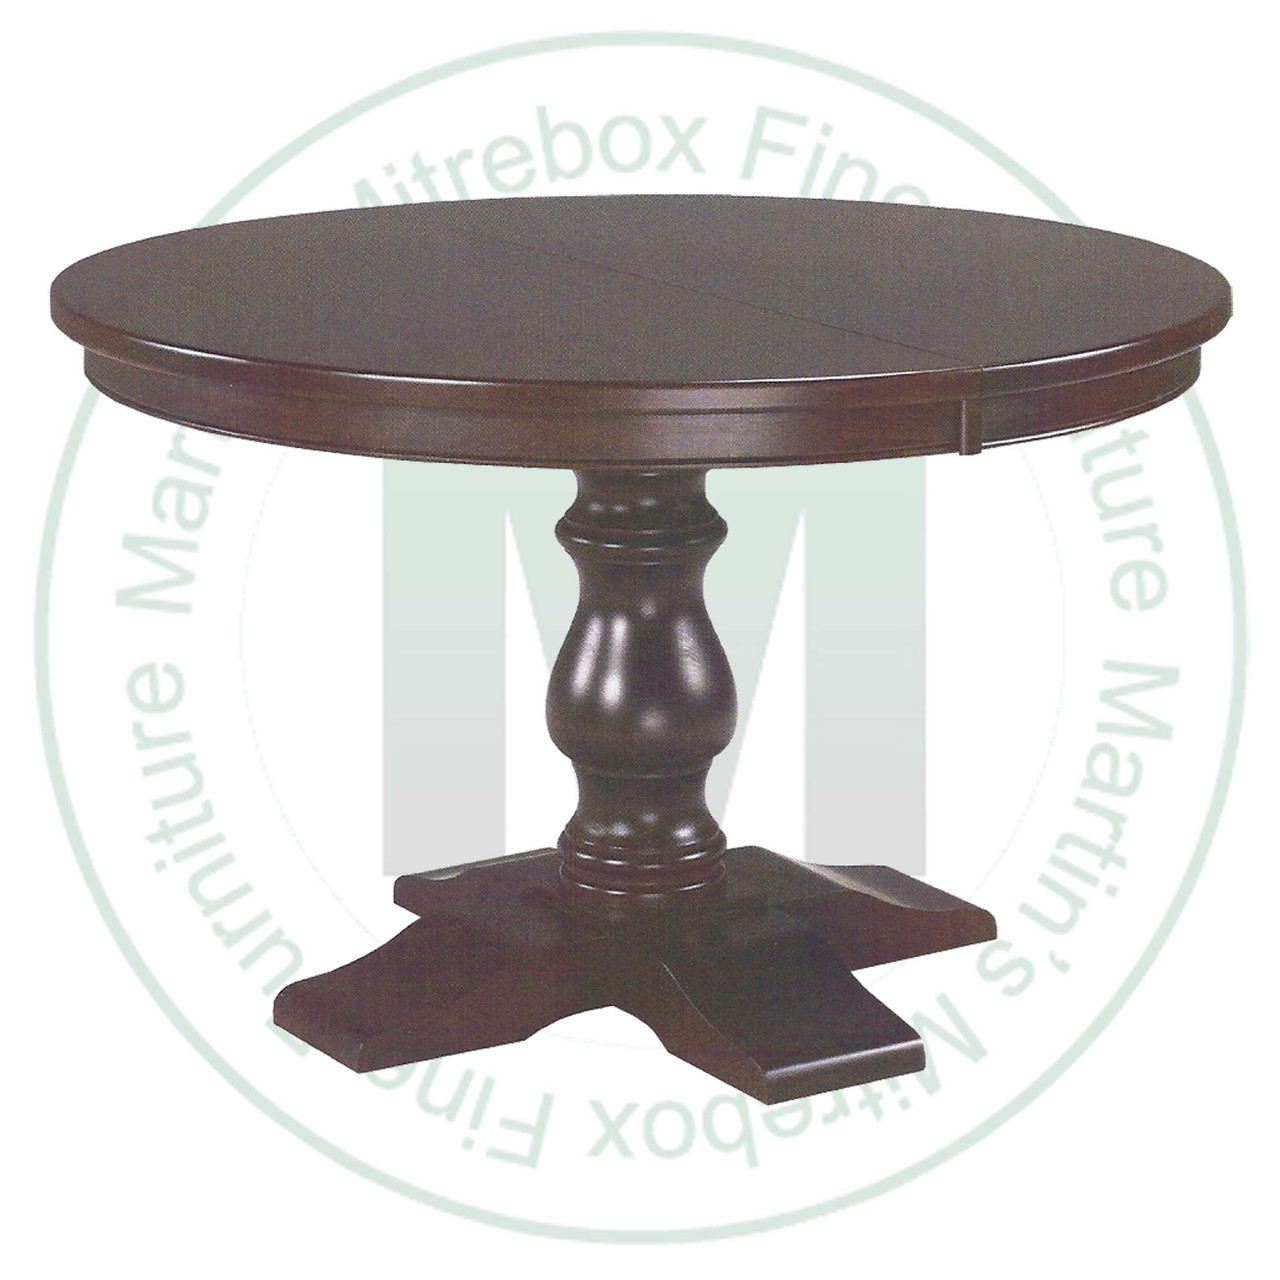 Oak Savannah Single Pedestal Table 36''D x 48''W x 30''H With 2 - 12'' Leaves Table. Table Has 1'' Thick Top.